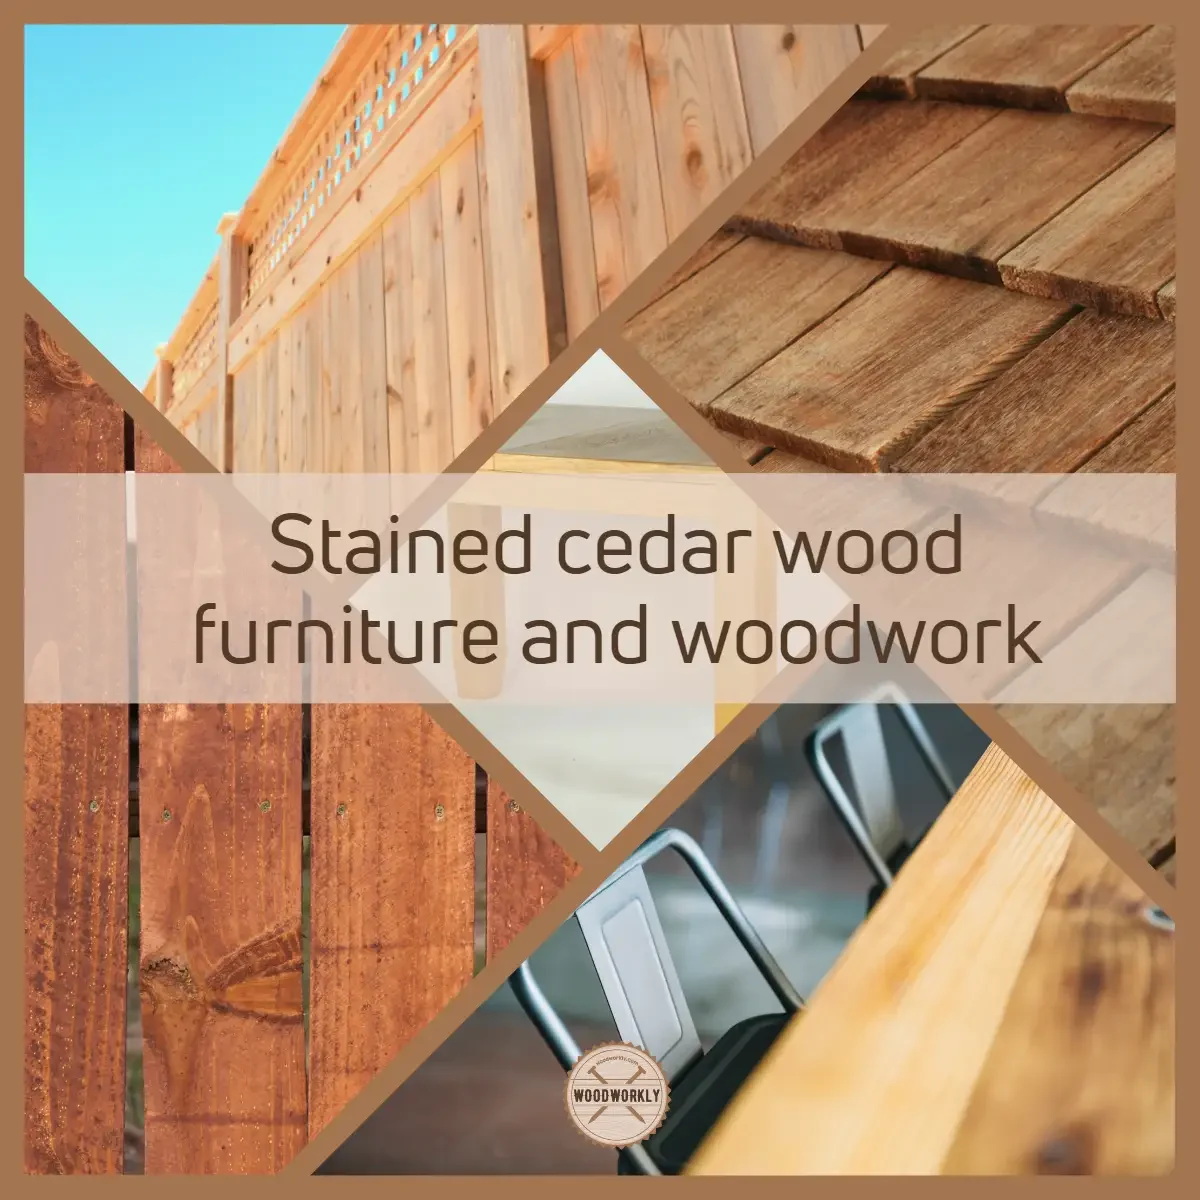 Stained cedar wood furniture and woodwork